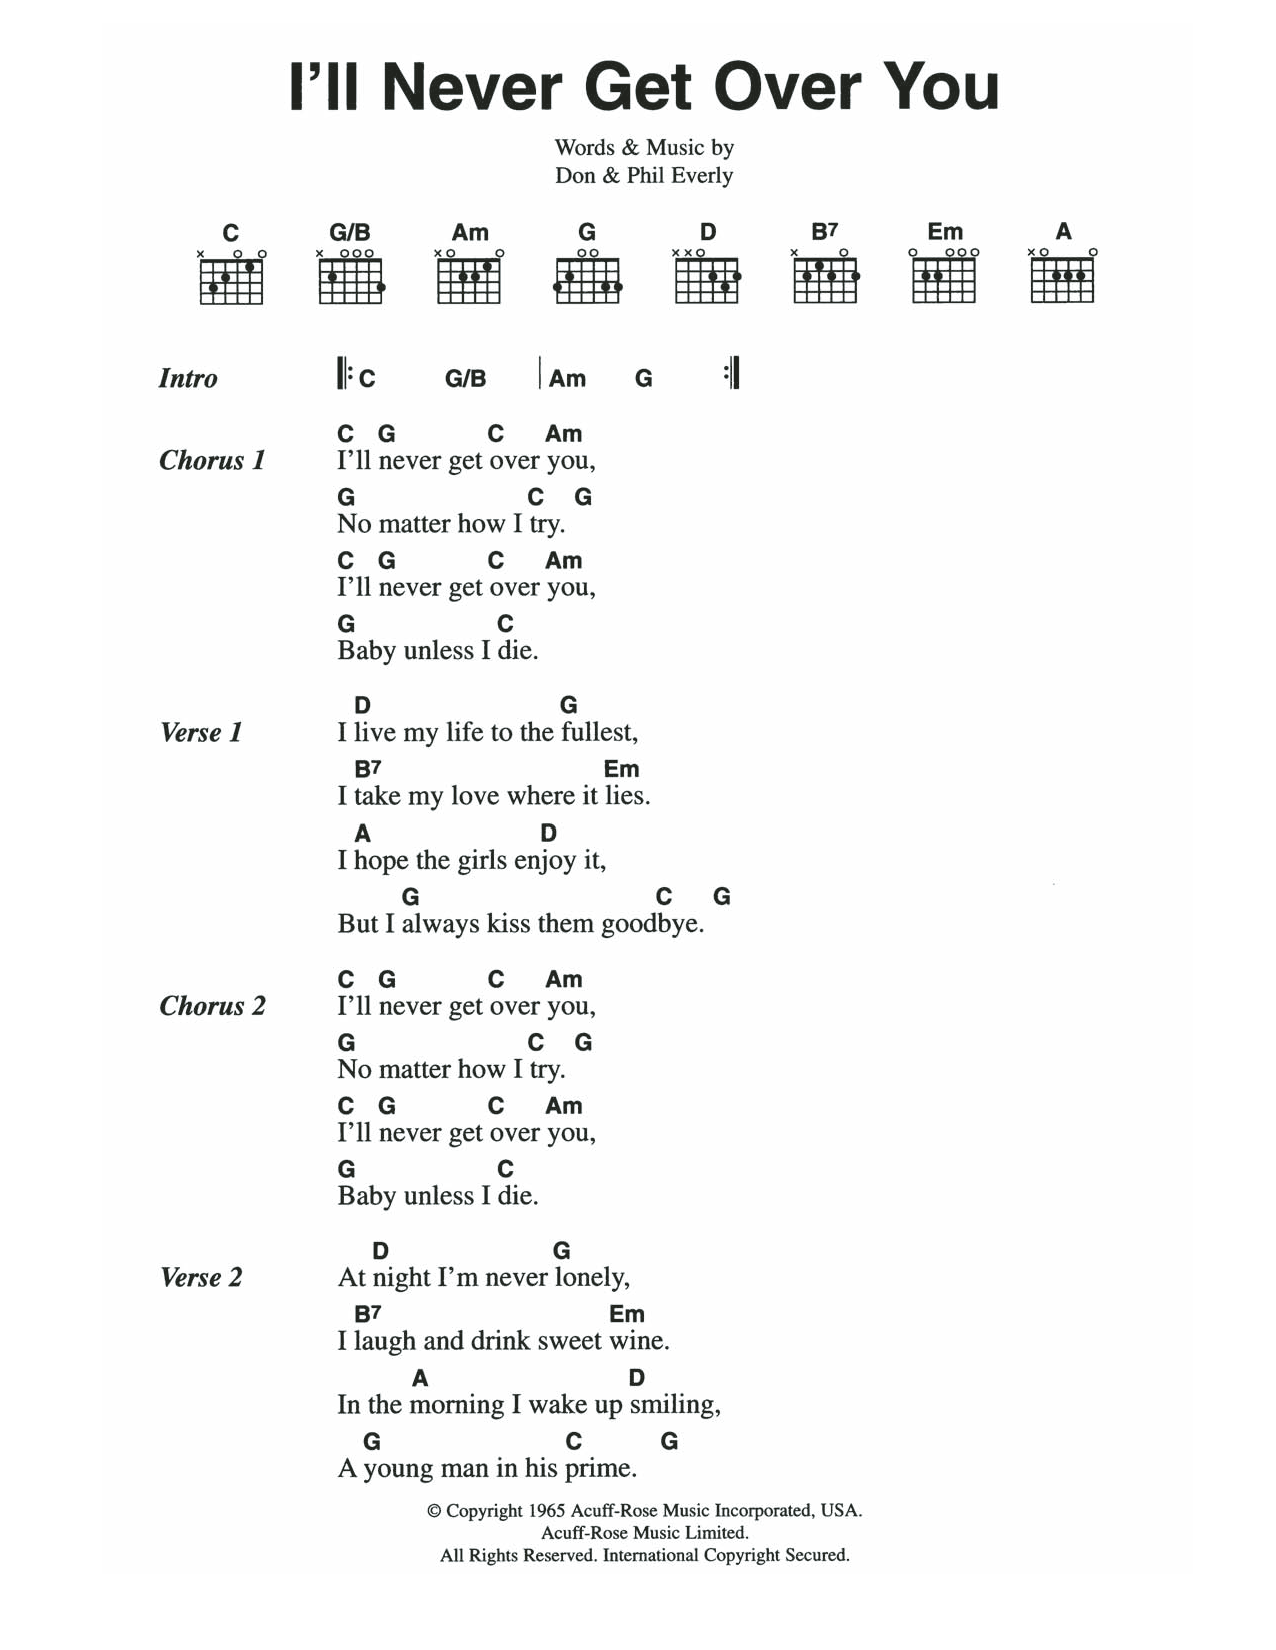 Download The Everly Brothers I'll Never Get Over You Sheet Music